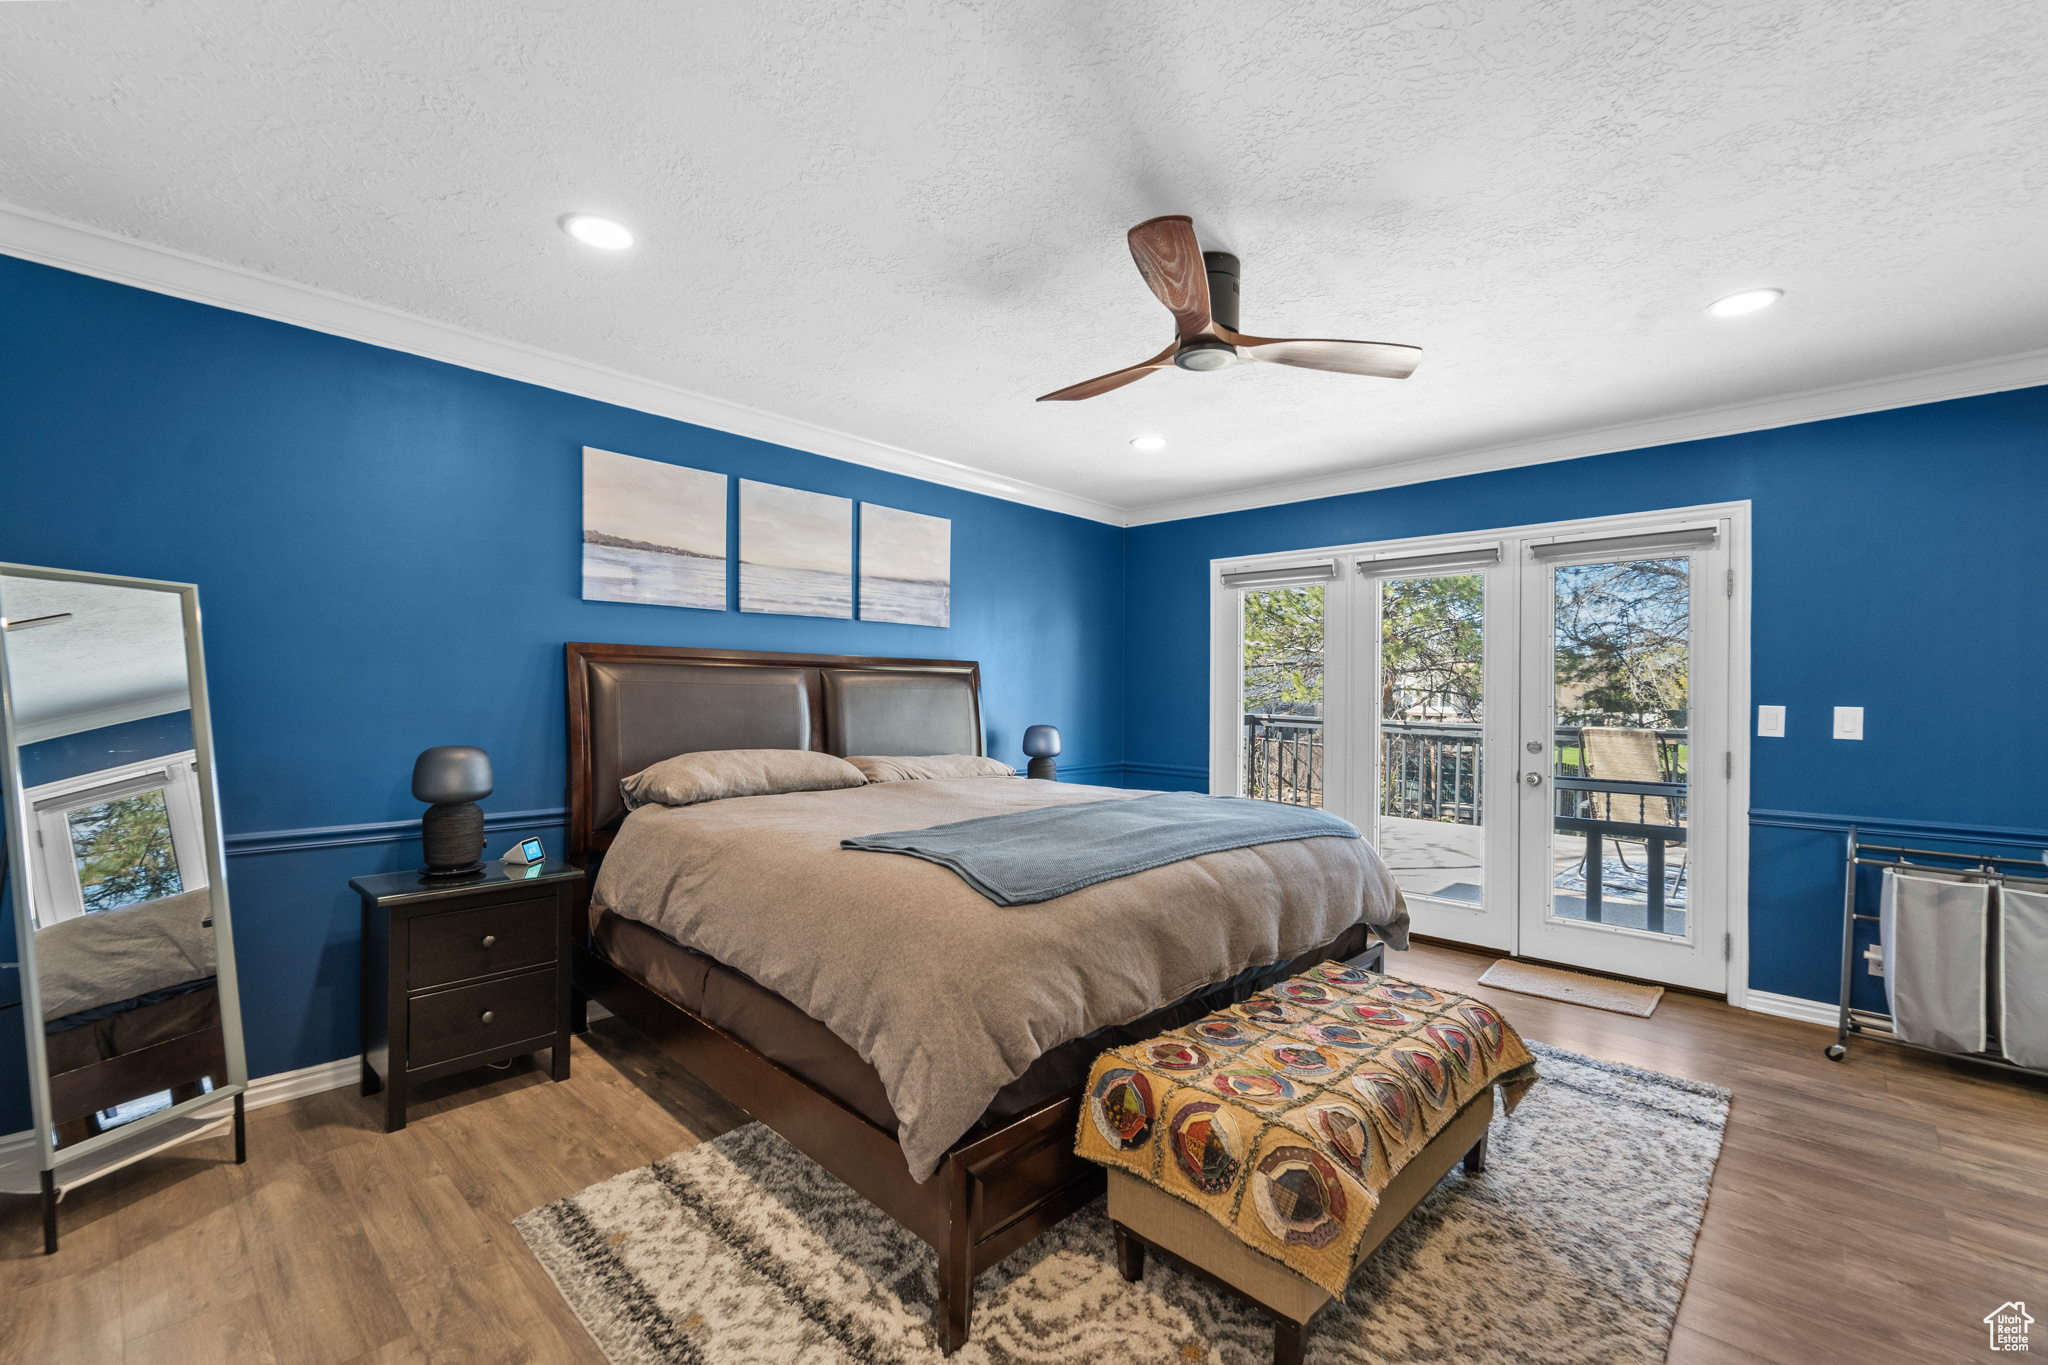 Primary Bedroom Grand Suite with crown molding, ceiling fan, smart dimmable lights, and access to huge private deck with fabulous view of the park like back yard and pool.